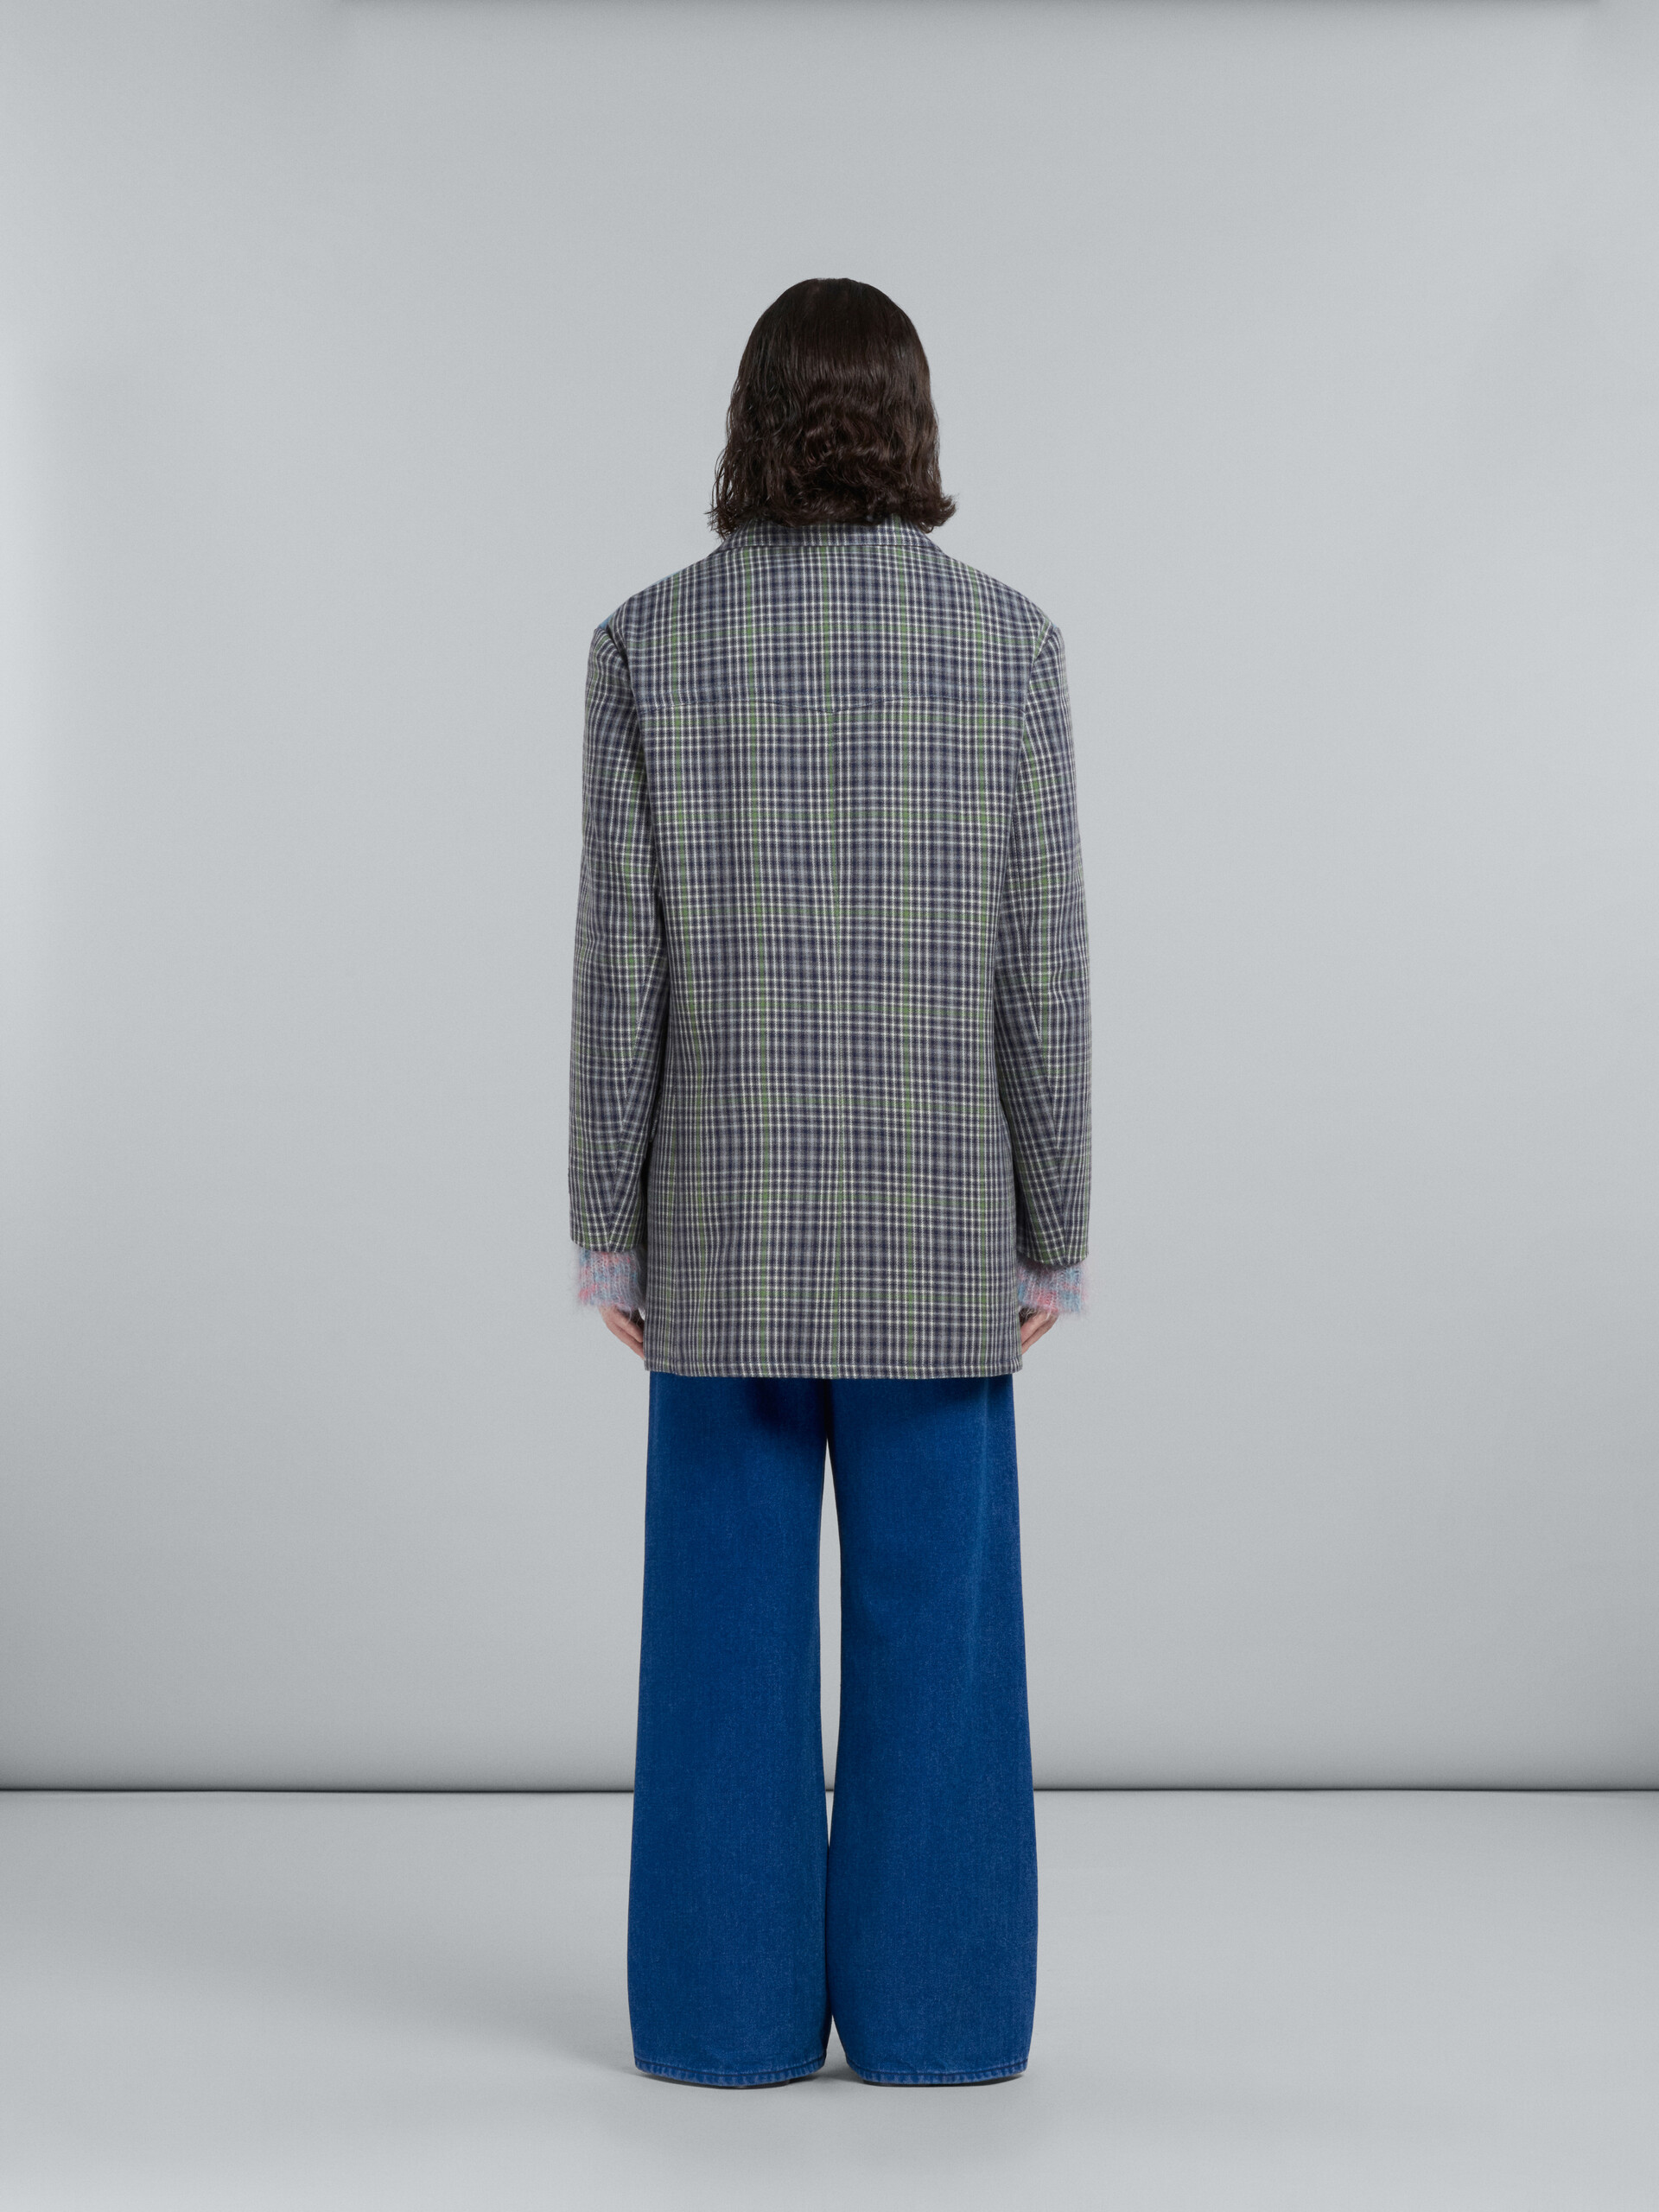 Double-breasted coat in grey chequered wool - Coat - Image 3